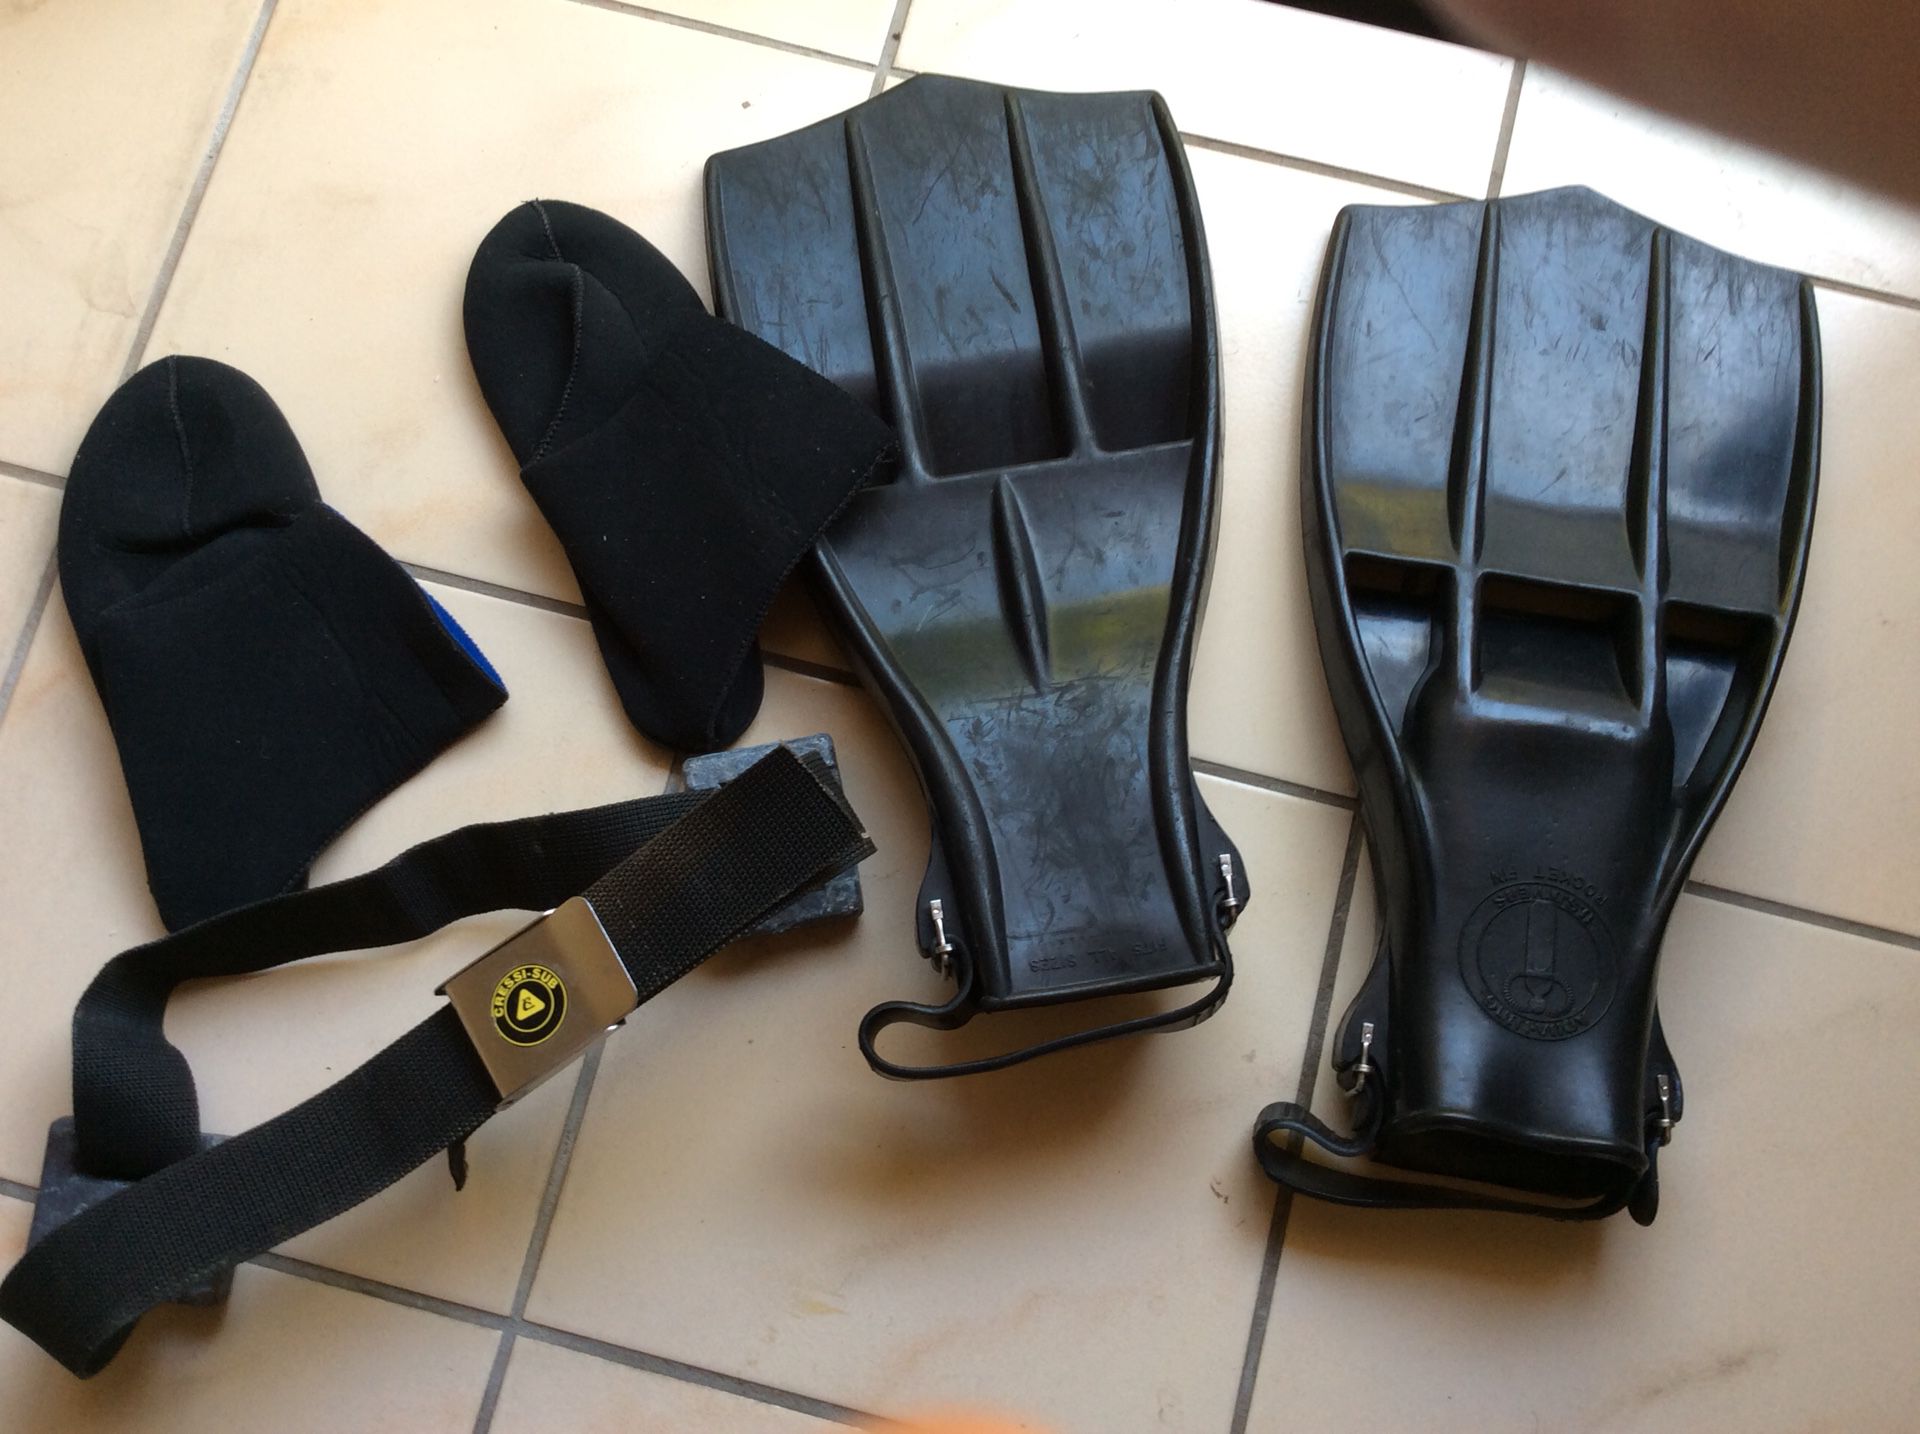 US Divers Rocket Fins, Booties size 10 - 12, Belt and Weights. All thats needed is a mask!